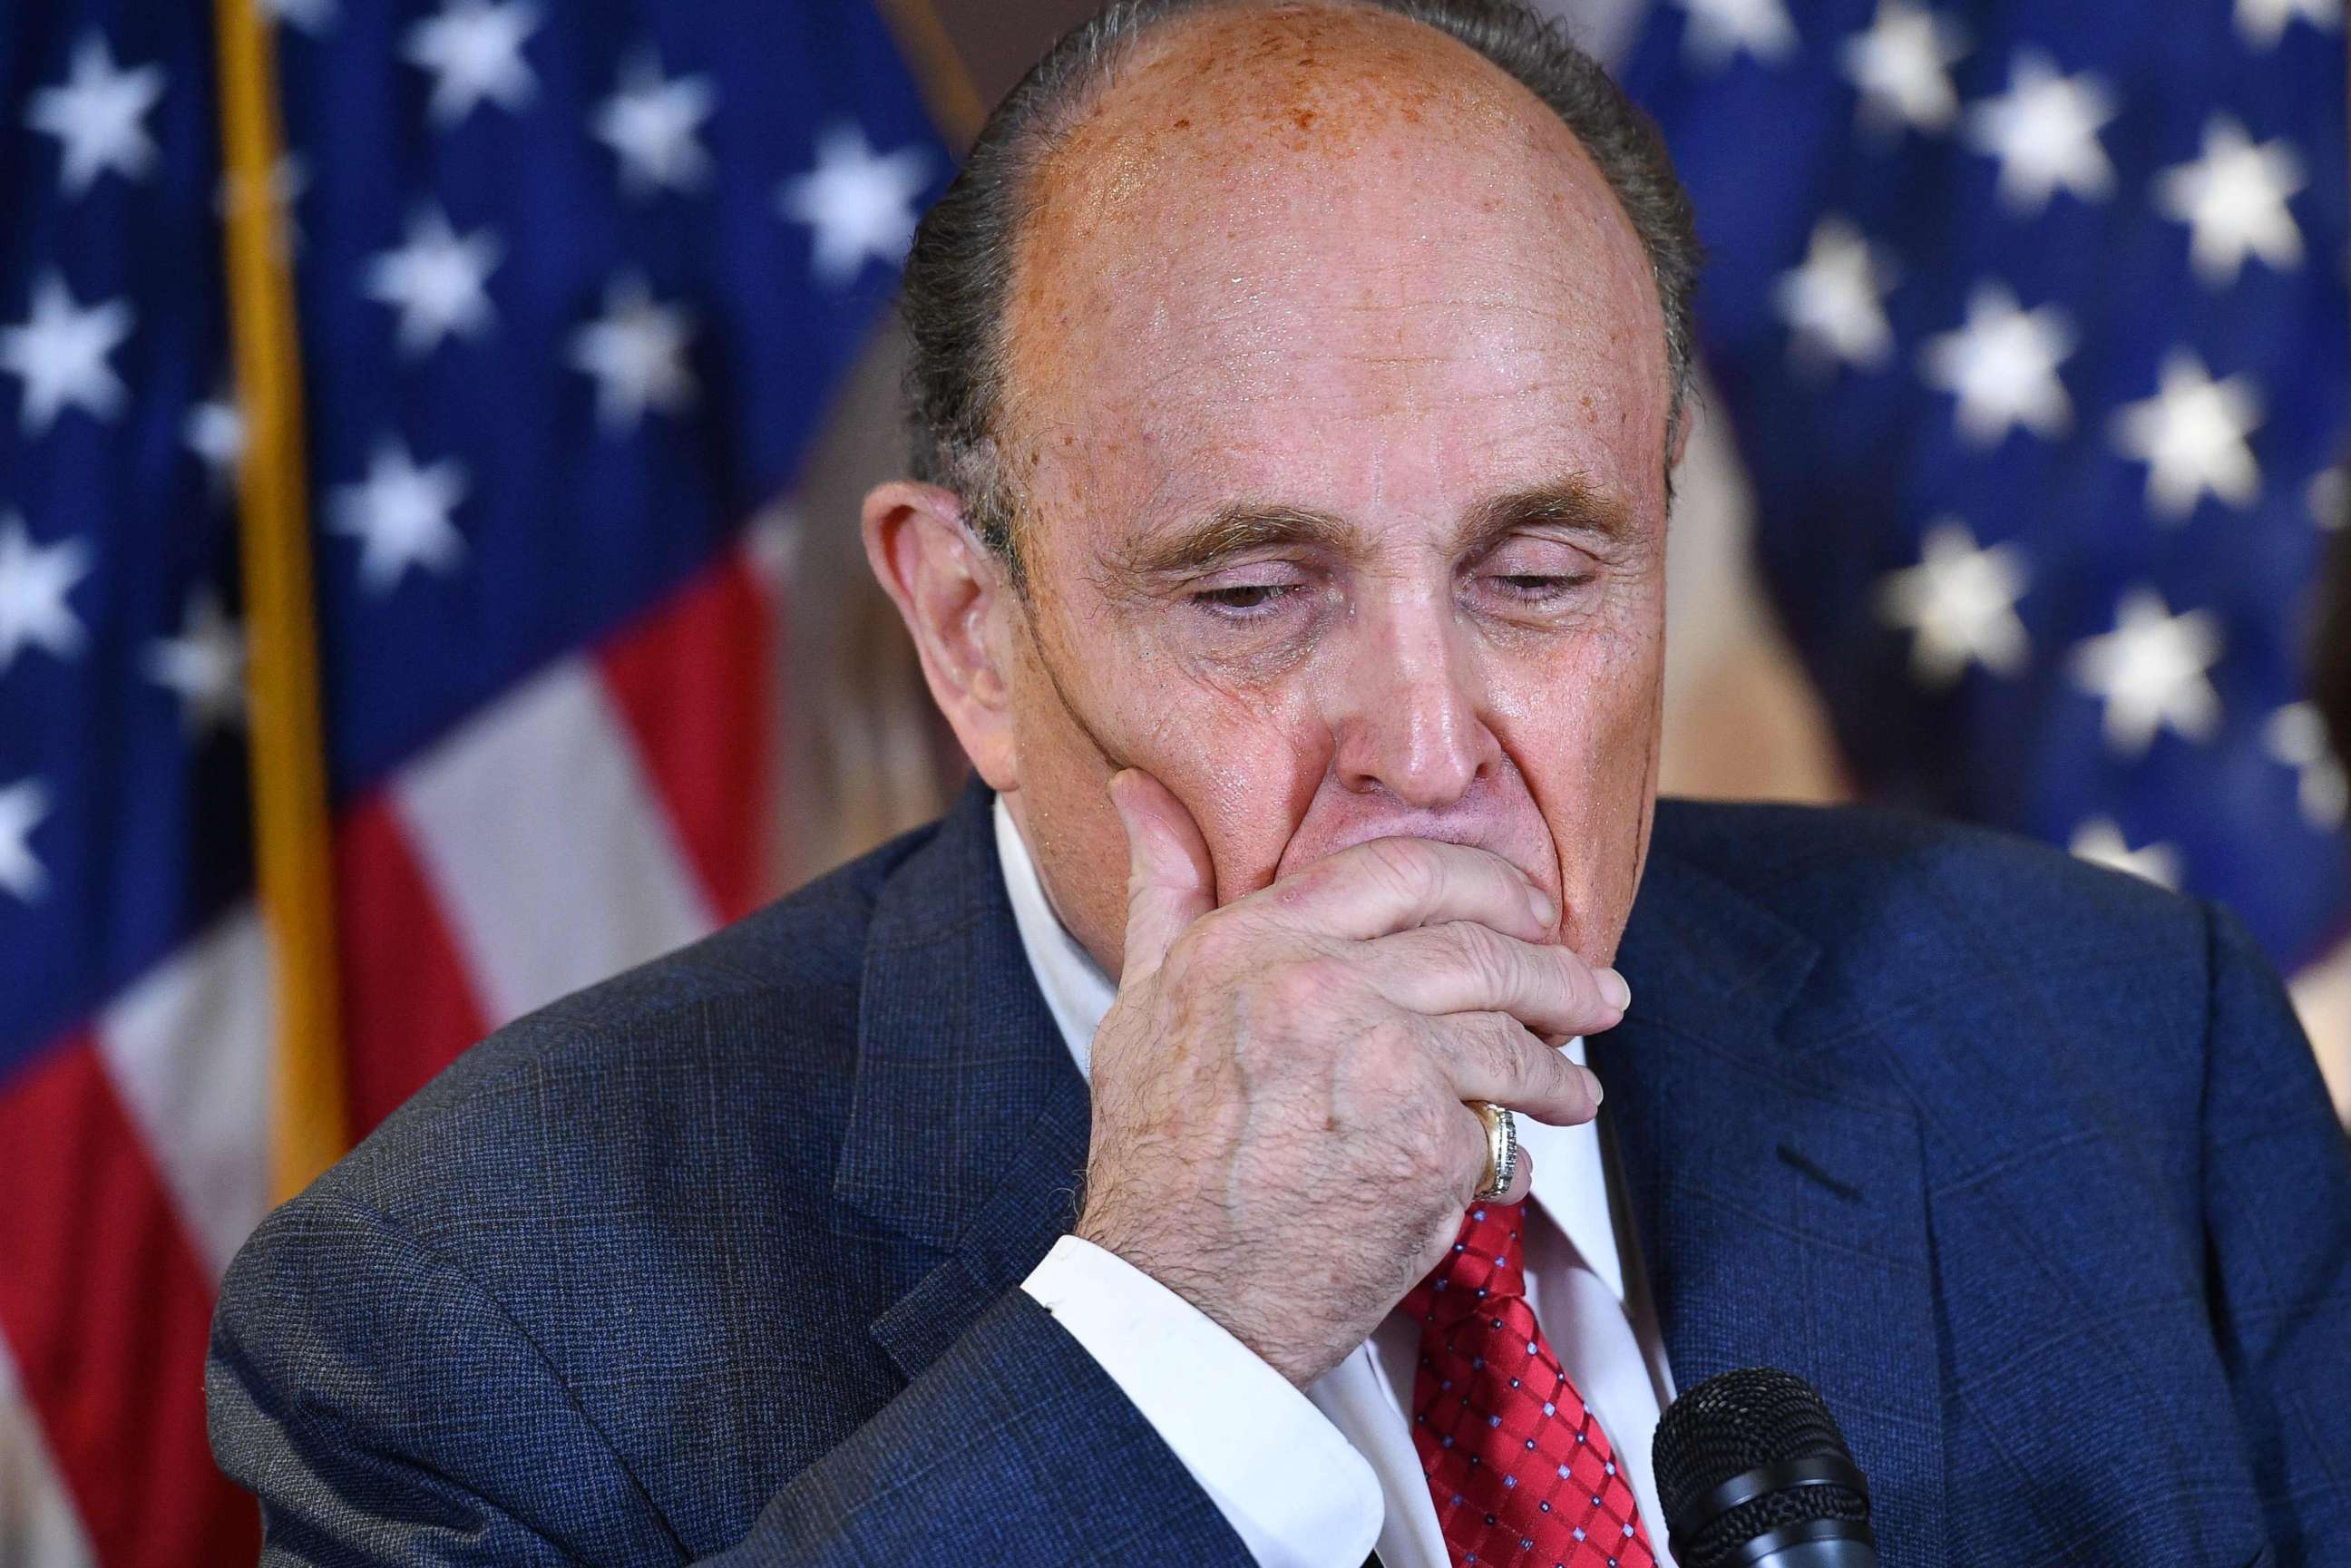 PHOTO: President Donald Trump's personal lawyer, Rudy Giuliani, speaks during a press conference at the Republican National Committee headquarters in Washington, D.C., on Nov. 19, 2020.